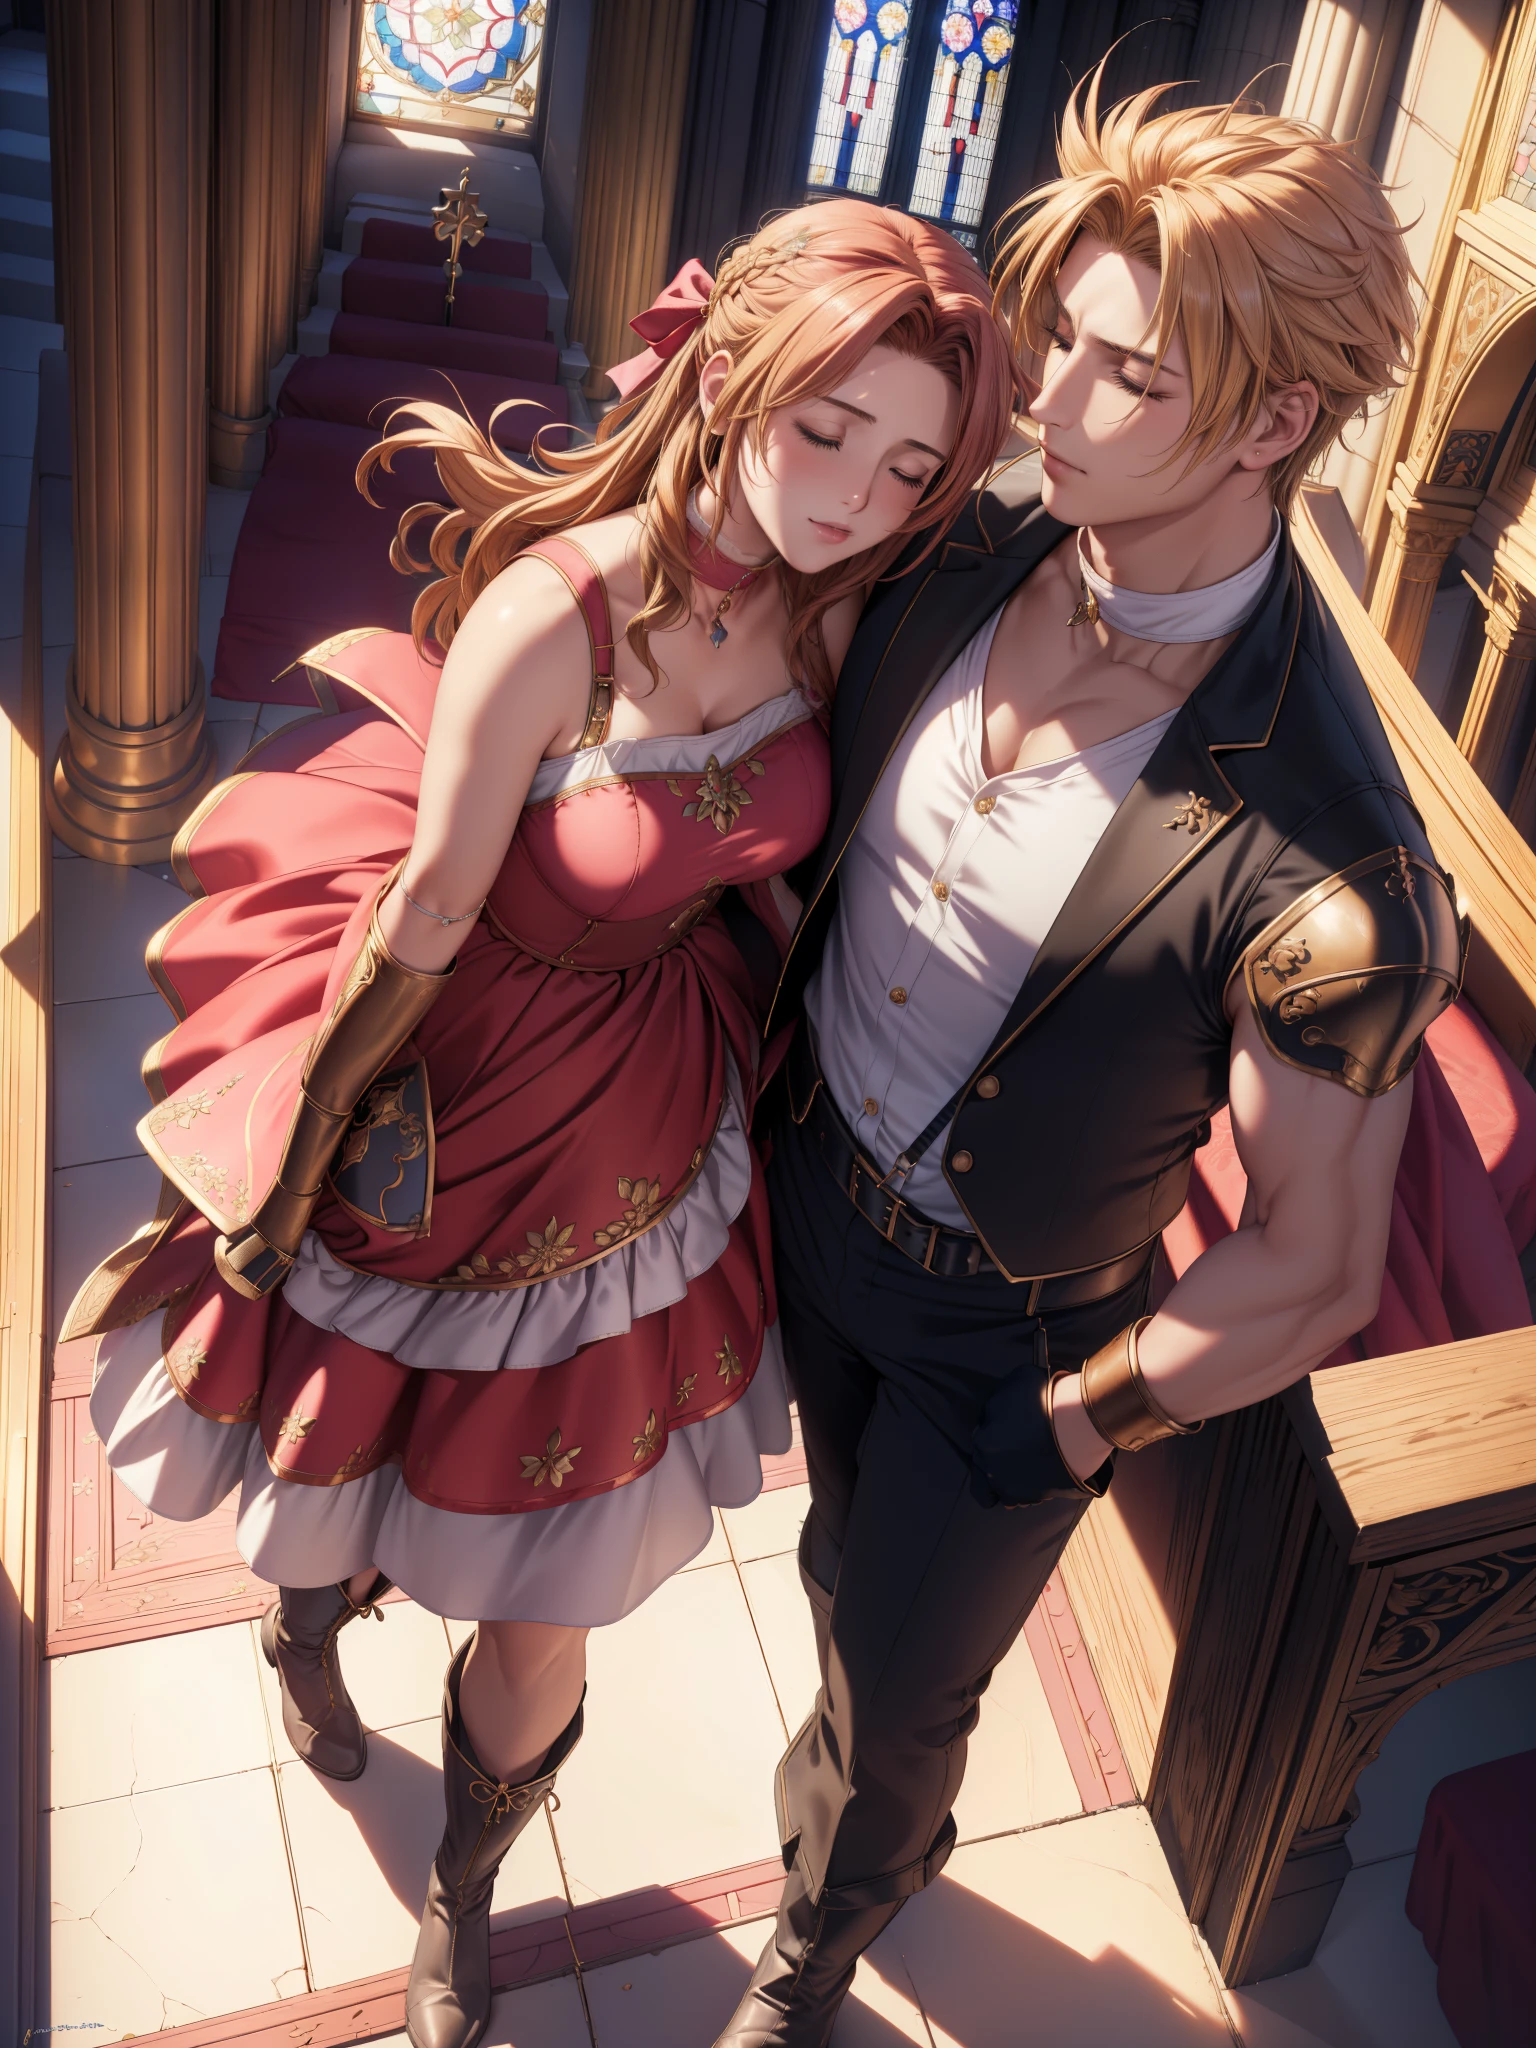 (highest quality,4K,8K,High resolution,masterpiece:1.2),super detailed,(realistic,photorealistic,photo-realistic:1.37),((1.woman, 1.man)), ((aerith gainsbourg copper hair:1.1, choker, red cropped jacket, hair ribbon, bracelet, pink dress)), ((Woman Inside the church, Quiet sleeping position on your back, wear a costume decorated with flowers)), ((princess carry:1.2)), Like a woman being held like a princess by a man., ((cloud strife blonde hair:1.2, shoulder armor, sleeveless turtleneck, suspenders, belt, baggy pants, gloves, braces, boots, standing looking at a woman)), ((Man holding a woman)), In the funeral scene for a deceased woman、Inside the church, Inside the chapel, stained glass window, The composition is bathed in light from the ceiling., A composition that looks at the two from above